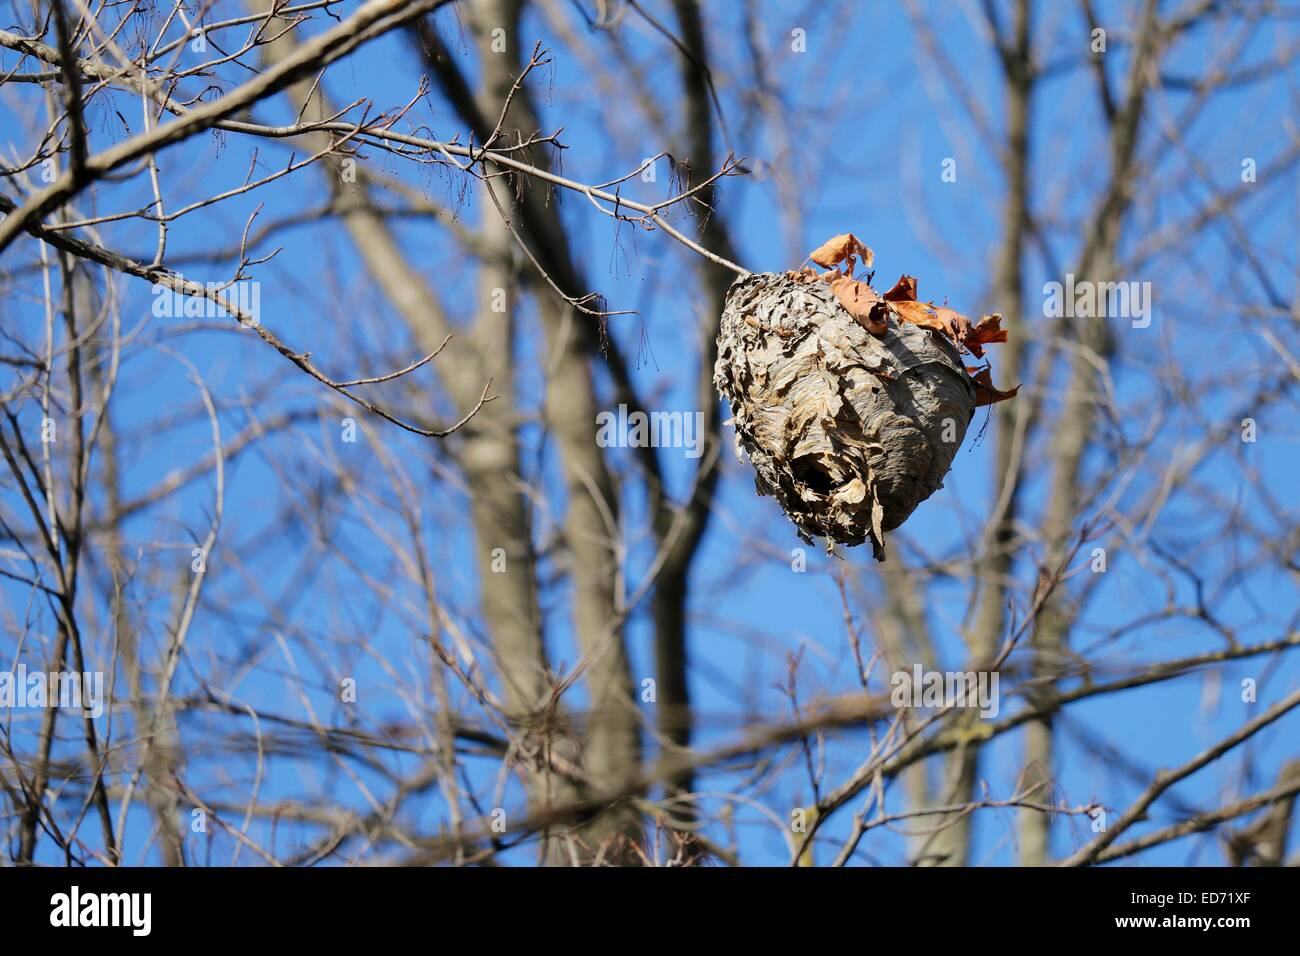 Hornets' nest hanging from tree branch. Stock Photo